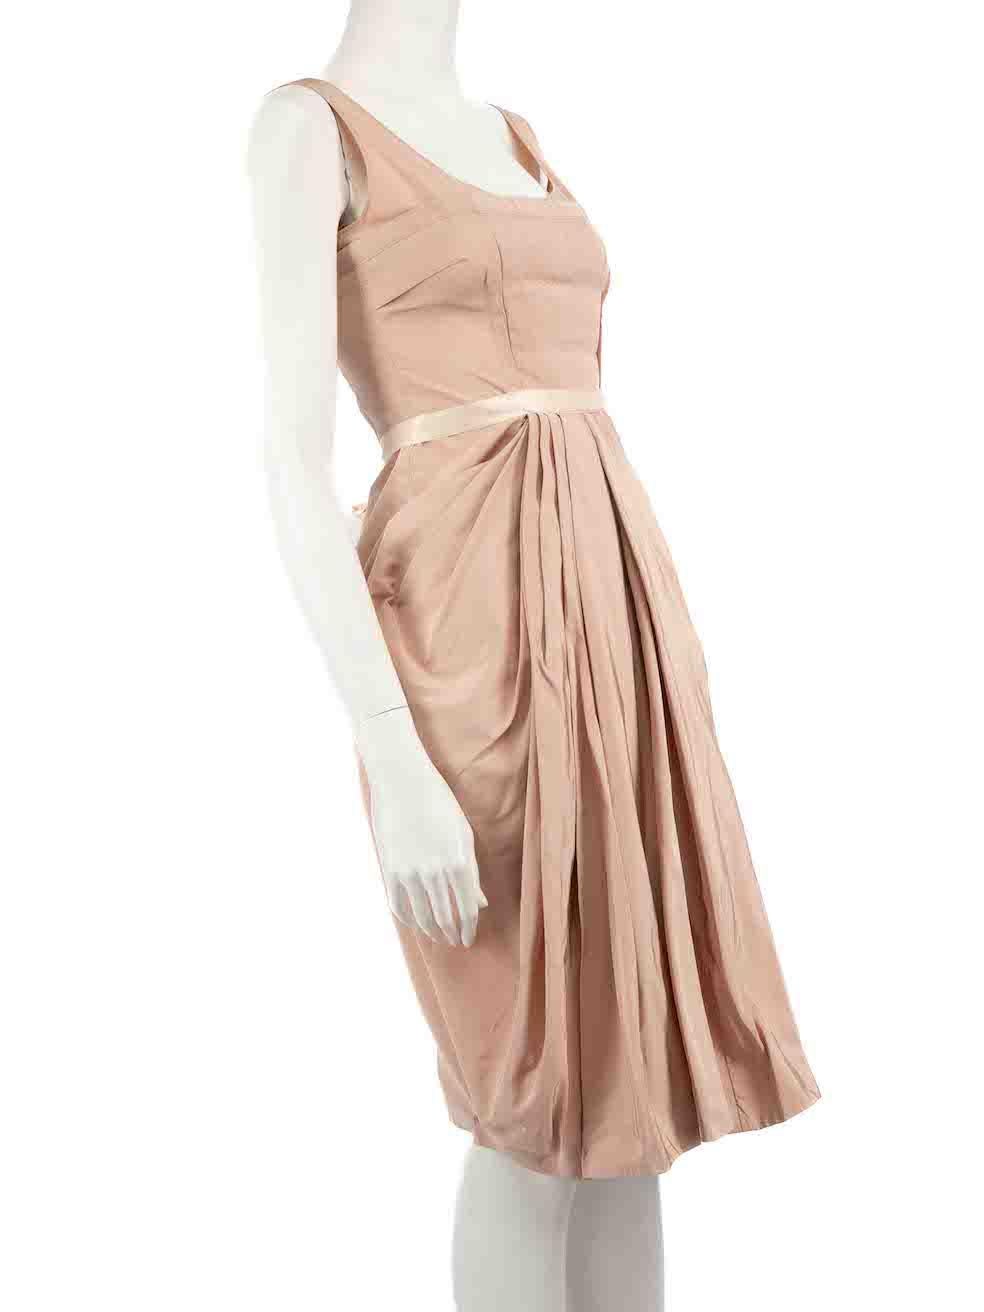 CONDITION is Very good. Hardly any visible wear to dress is evident on this used Prada designer resale item.
 
 Details
 Pink
 Silk
 Midi dress
 Pleated detail
 Round neckline
 Tie strap belted
 Ruched gathered accent
 Back zip closure with snap